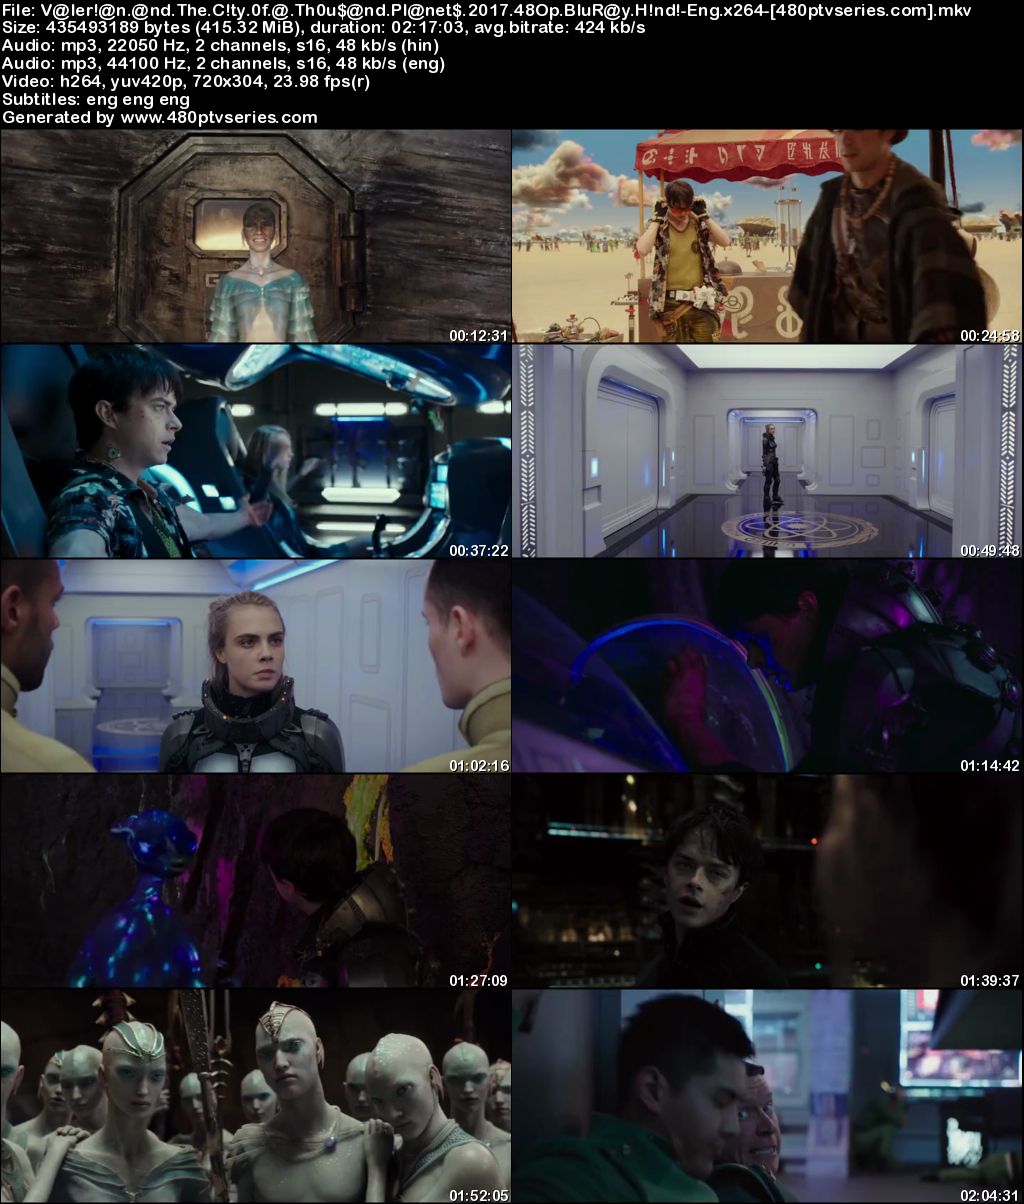 Valerian and the City of a Thousand Planets (2017) 400MB Full Hindi Dual Audio Movie Download 480p BluRay Free Watch Online Full Movie Download Worldfree4u 9xmovies